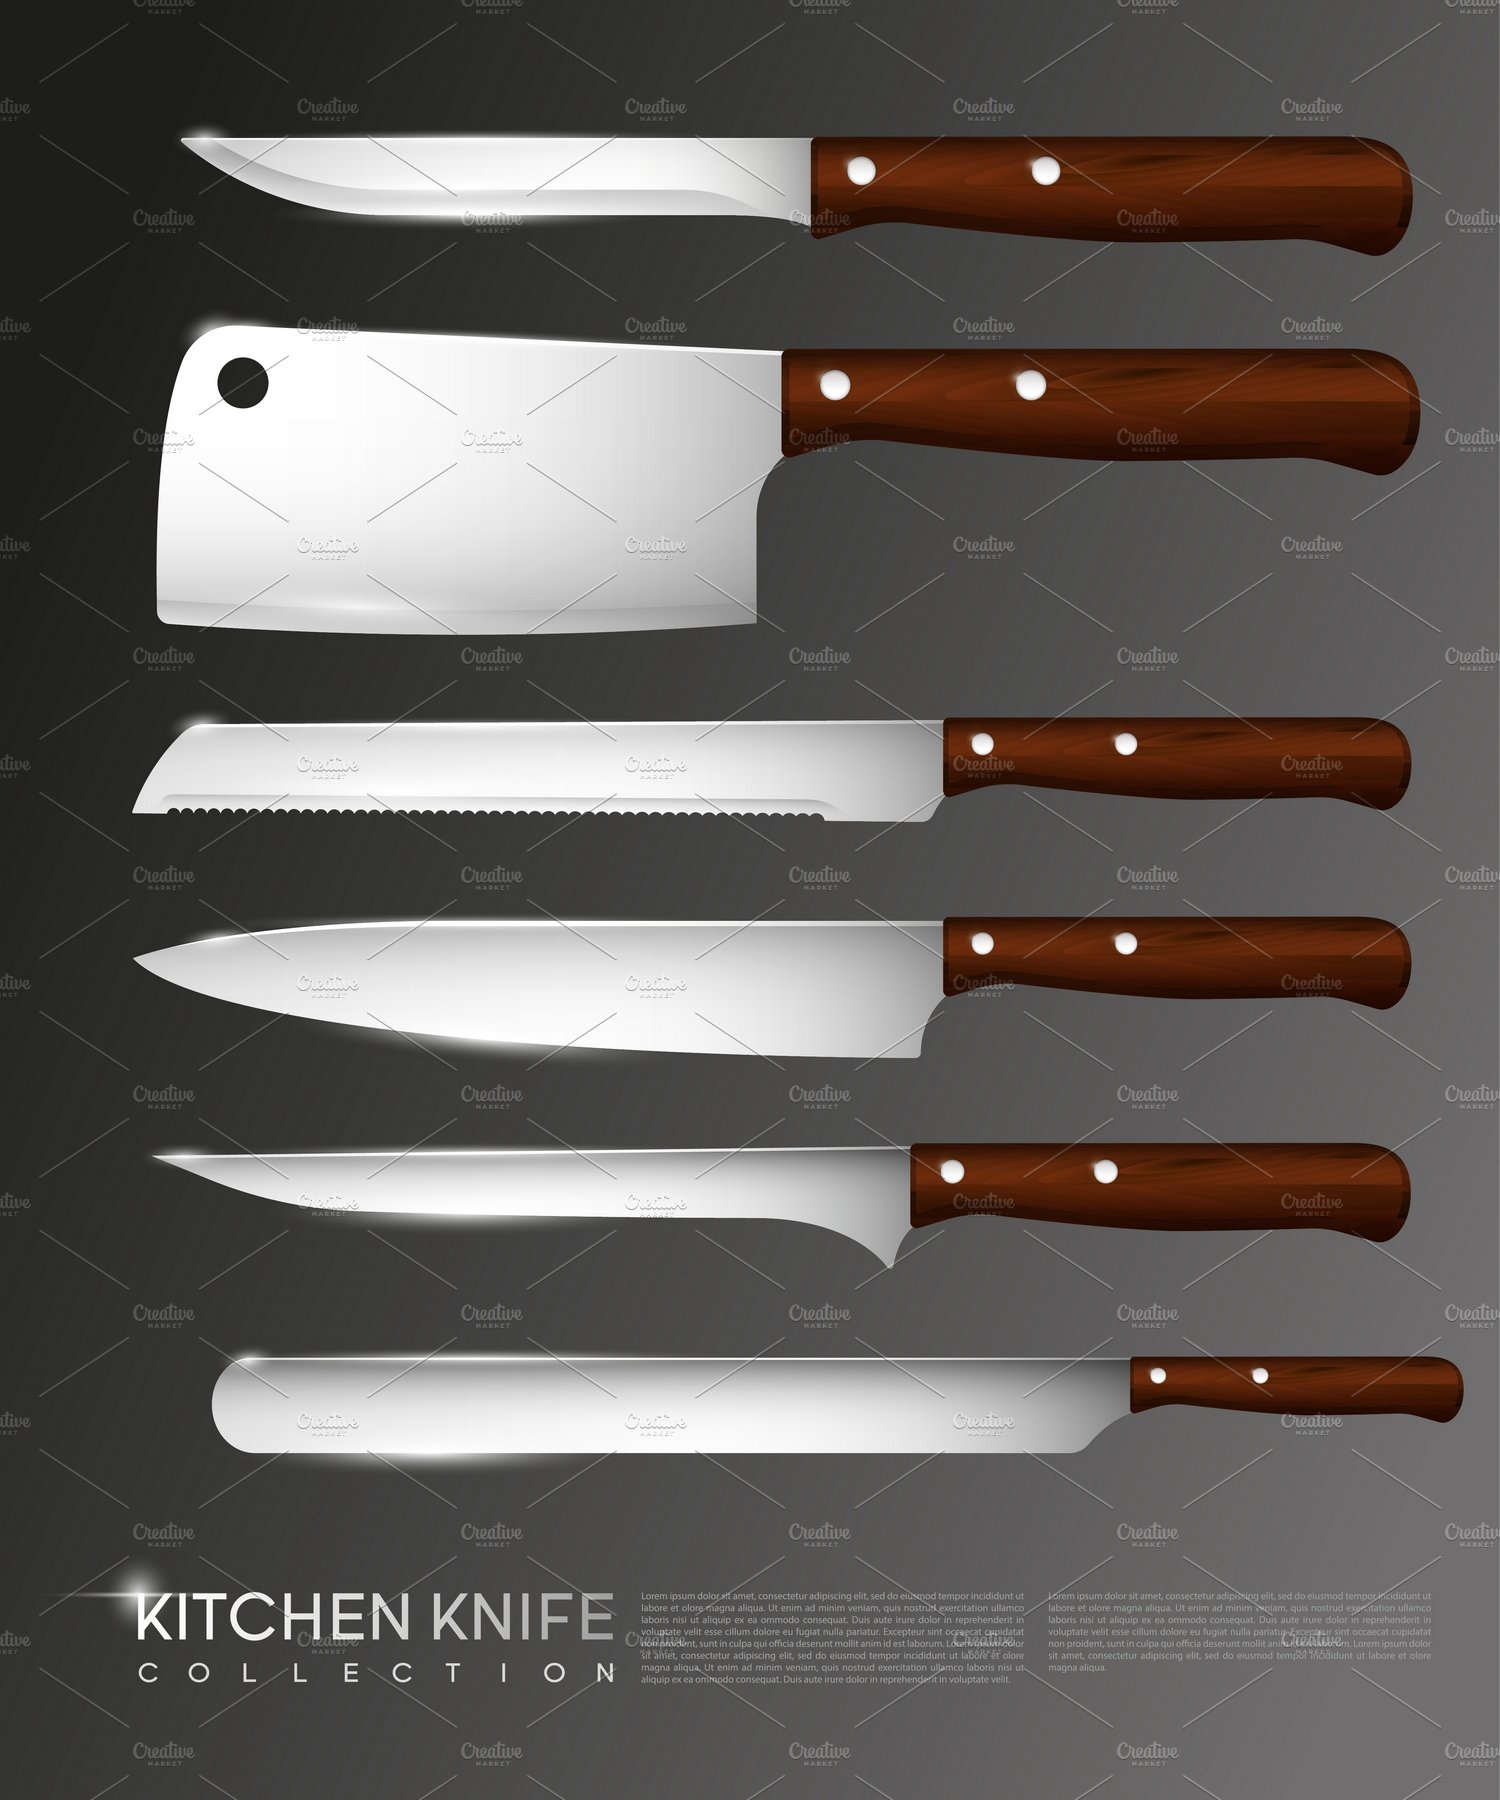 Realistic Knives Collection cover image.